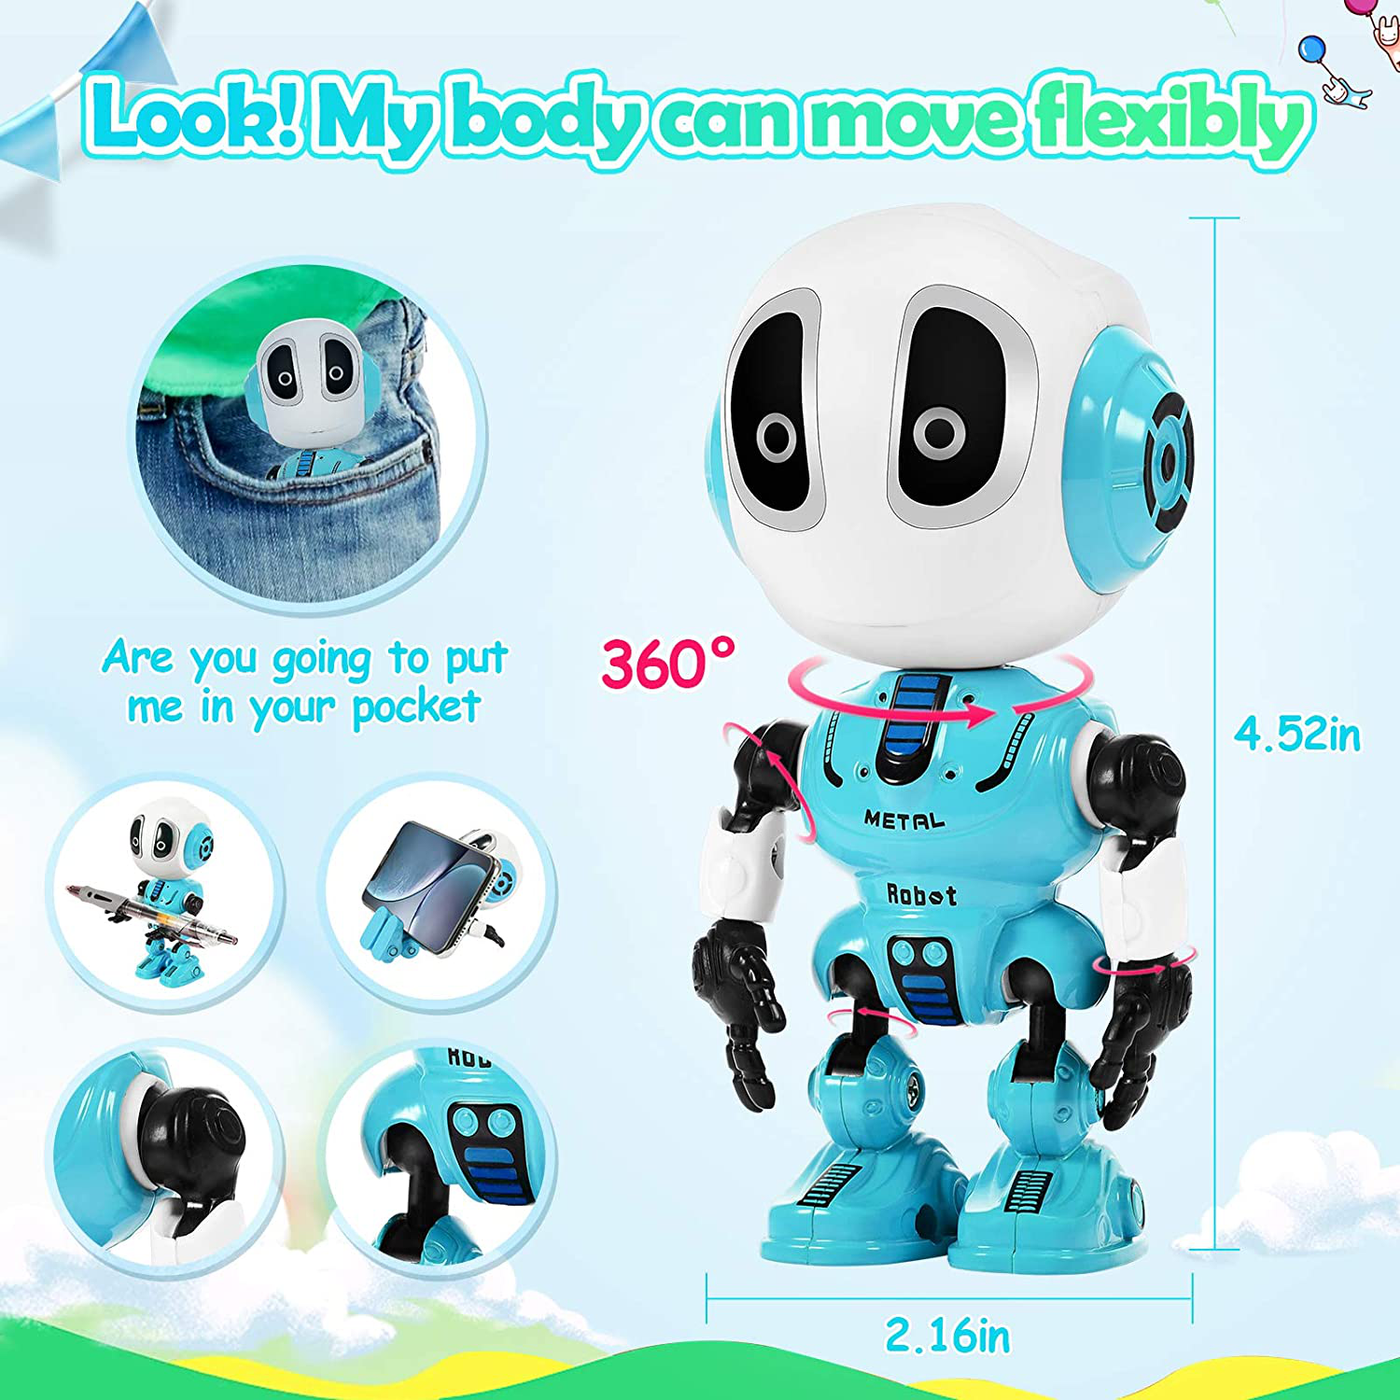 SYOKZEY Cool Toys for 3-8 Year Old Kids Robots Toys for Boys Girls Age 3-8 Fun for Kids Age 3-8 Popular Toys for 3-8 Year Old Boys Girls Toys for Kids 3-8 Yrs Stocking Stuffers for Toddlers (Green)